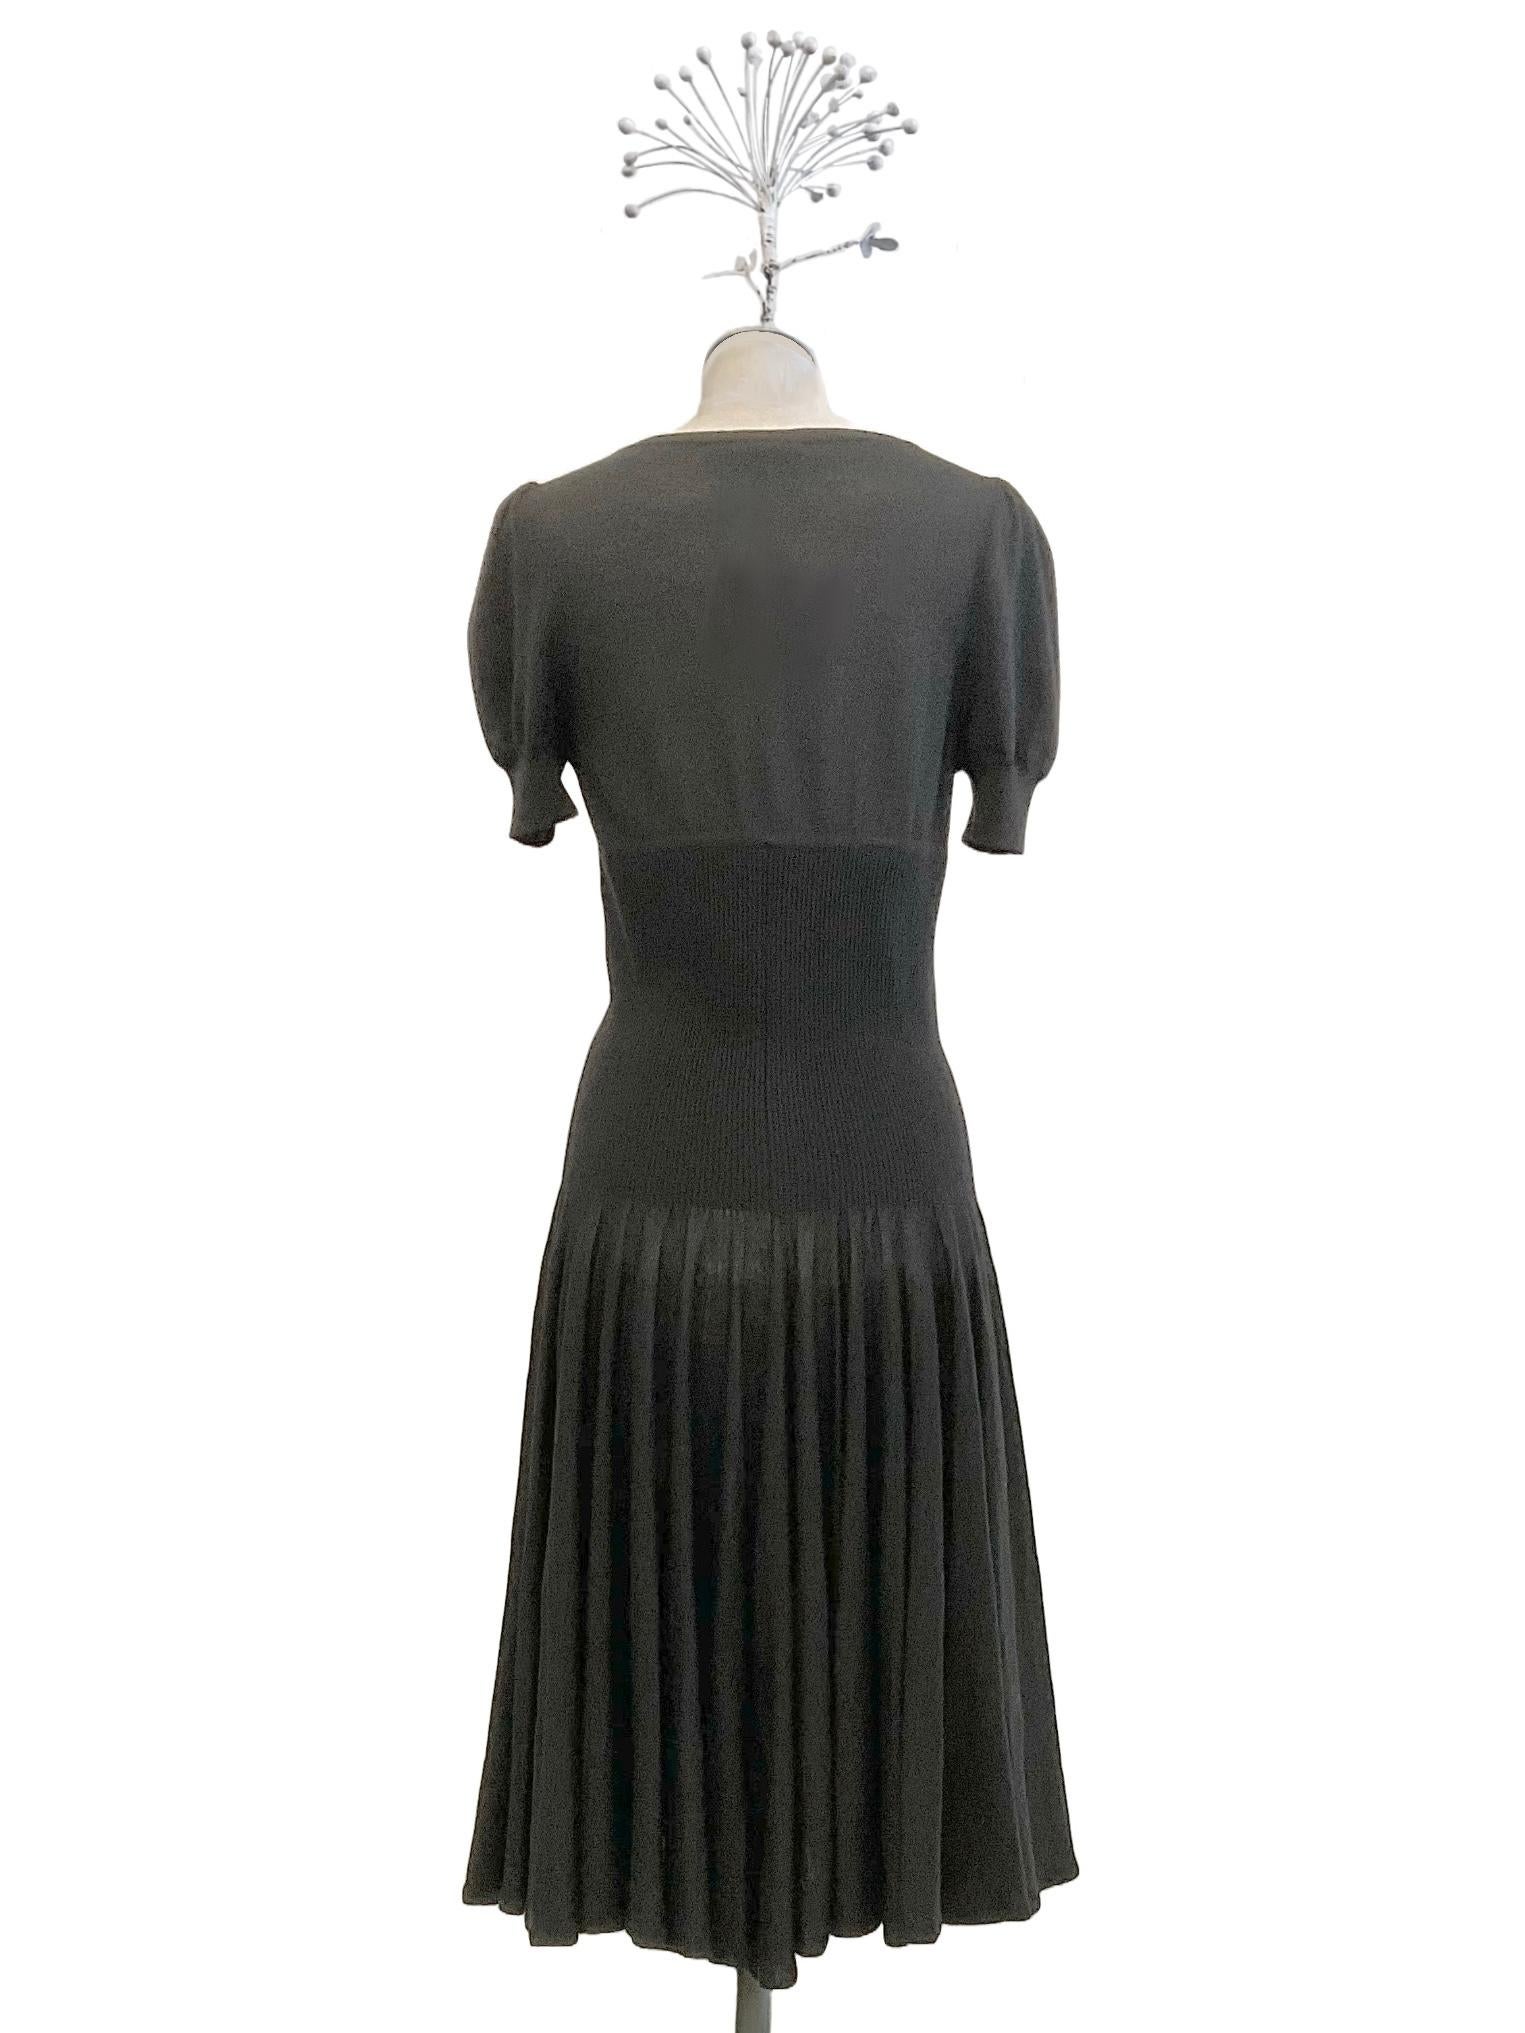 Alexander McQueen black midi dress with fitted waistline and
wide skirt flared toward the bottom.
The neckline is V-neck and the short sleeve is slightly puffed.
The silhouette is emphasized by dense fine ribbing.
The dress is made of fine knit with